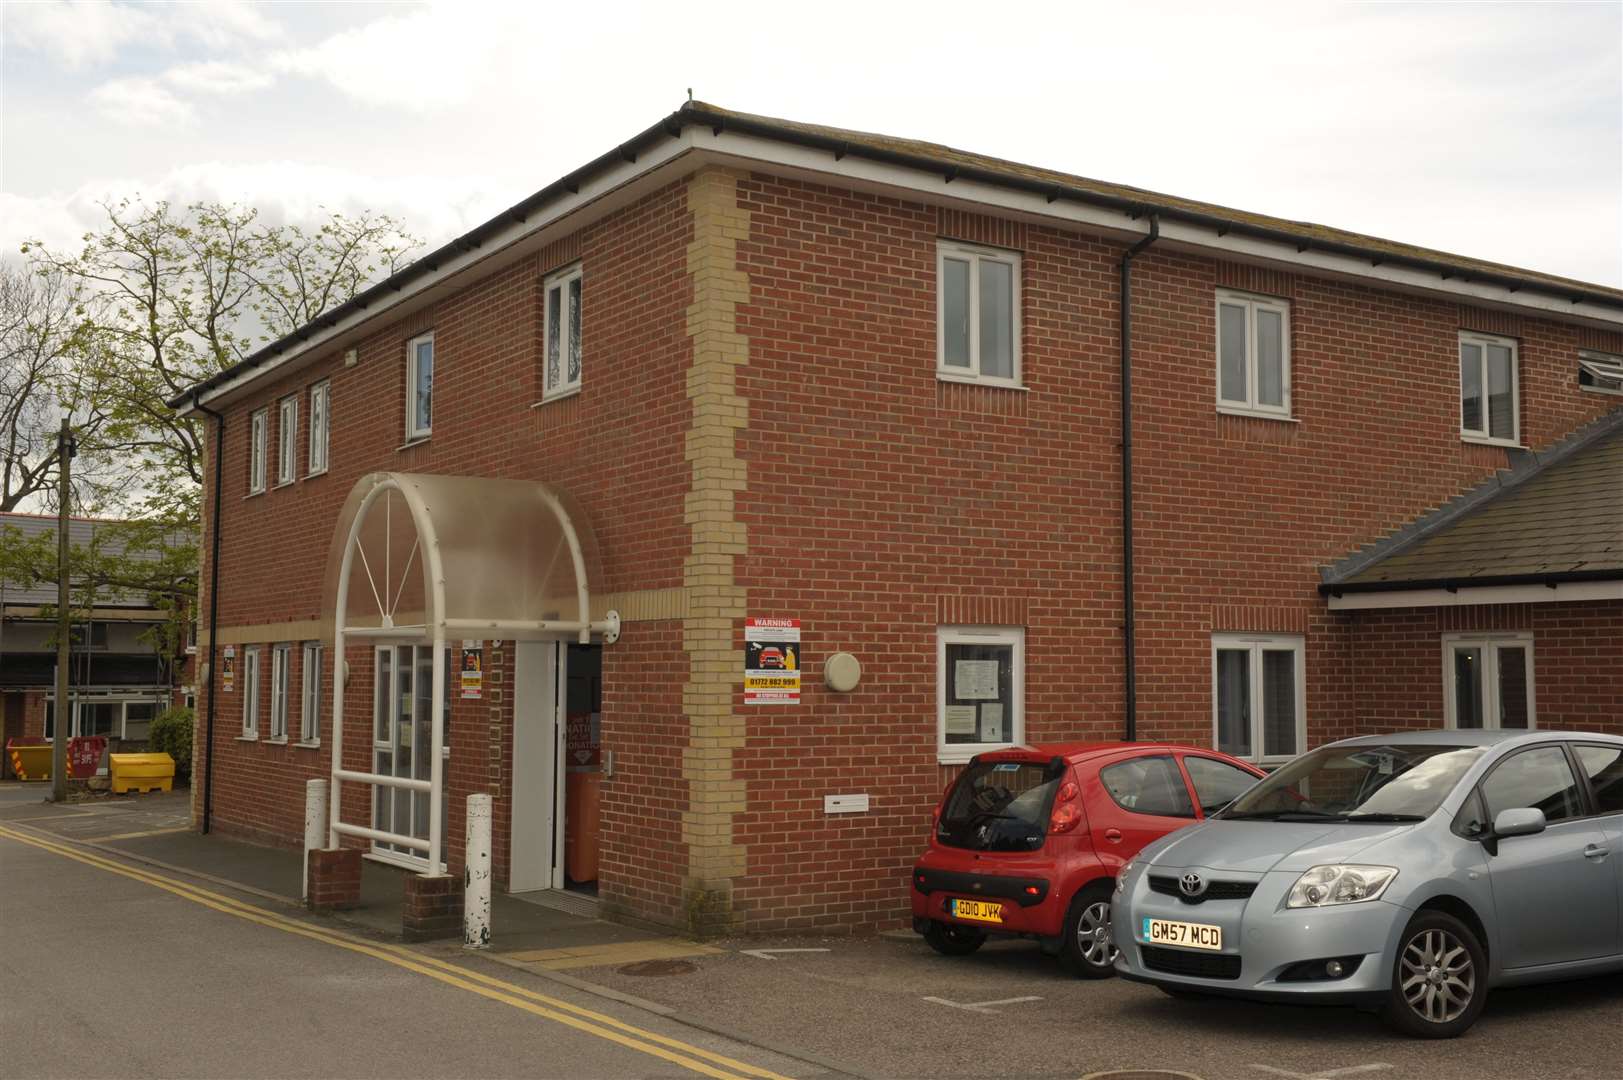 The Bearsted Medical Practice